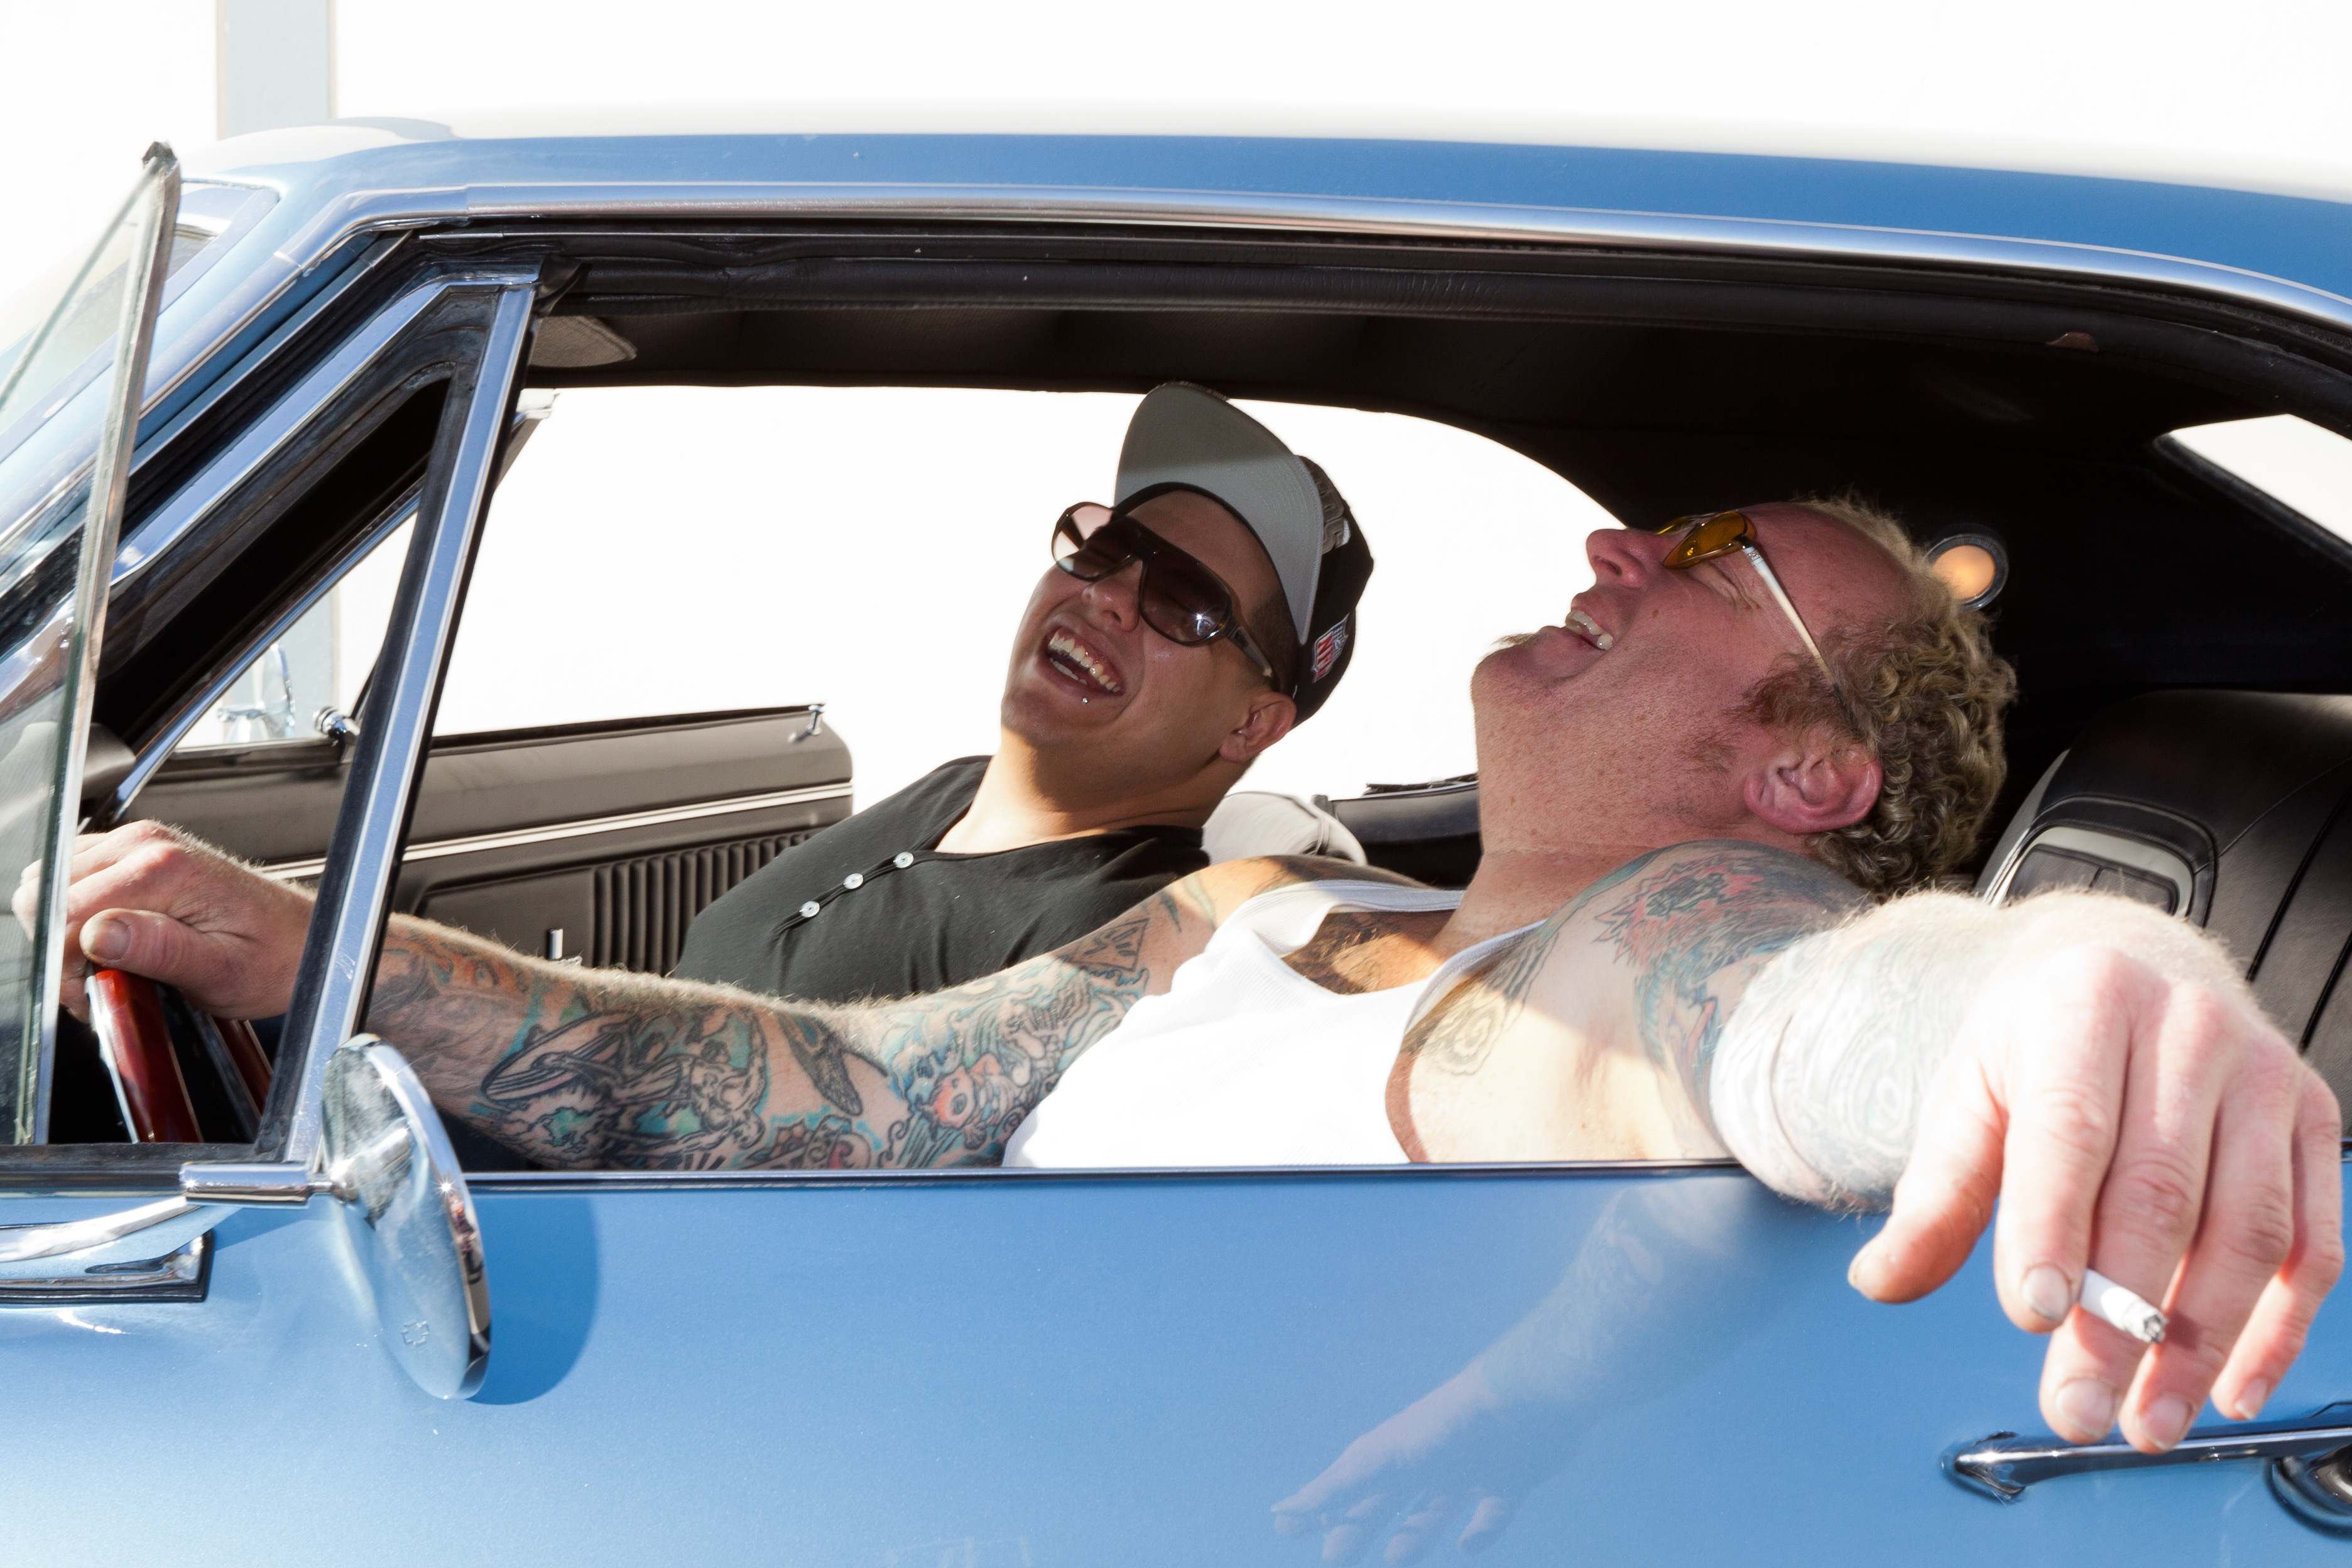 Sublime With Rome in Rio on Nov. 25th